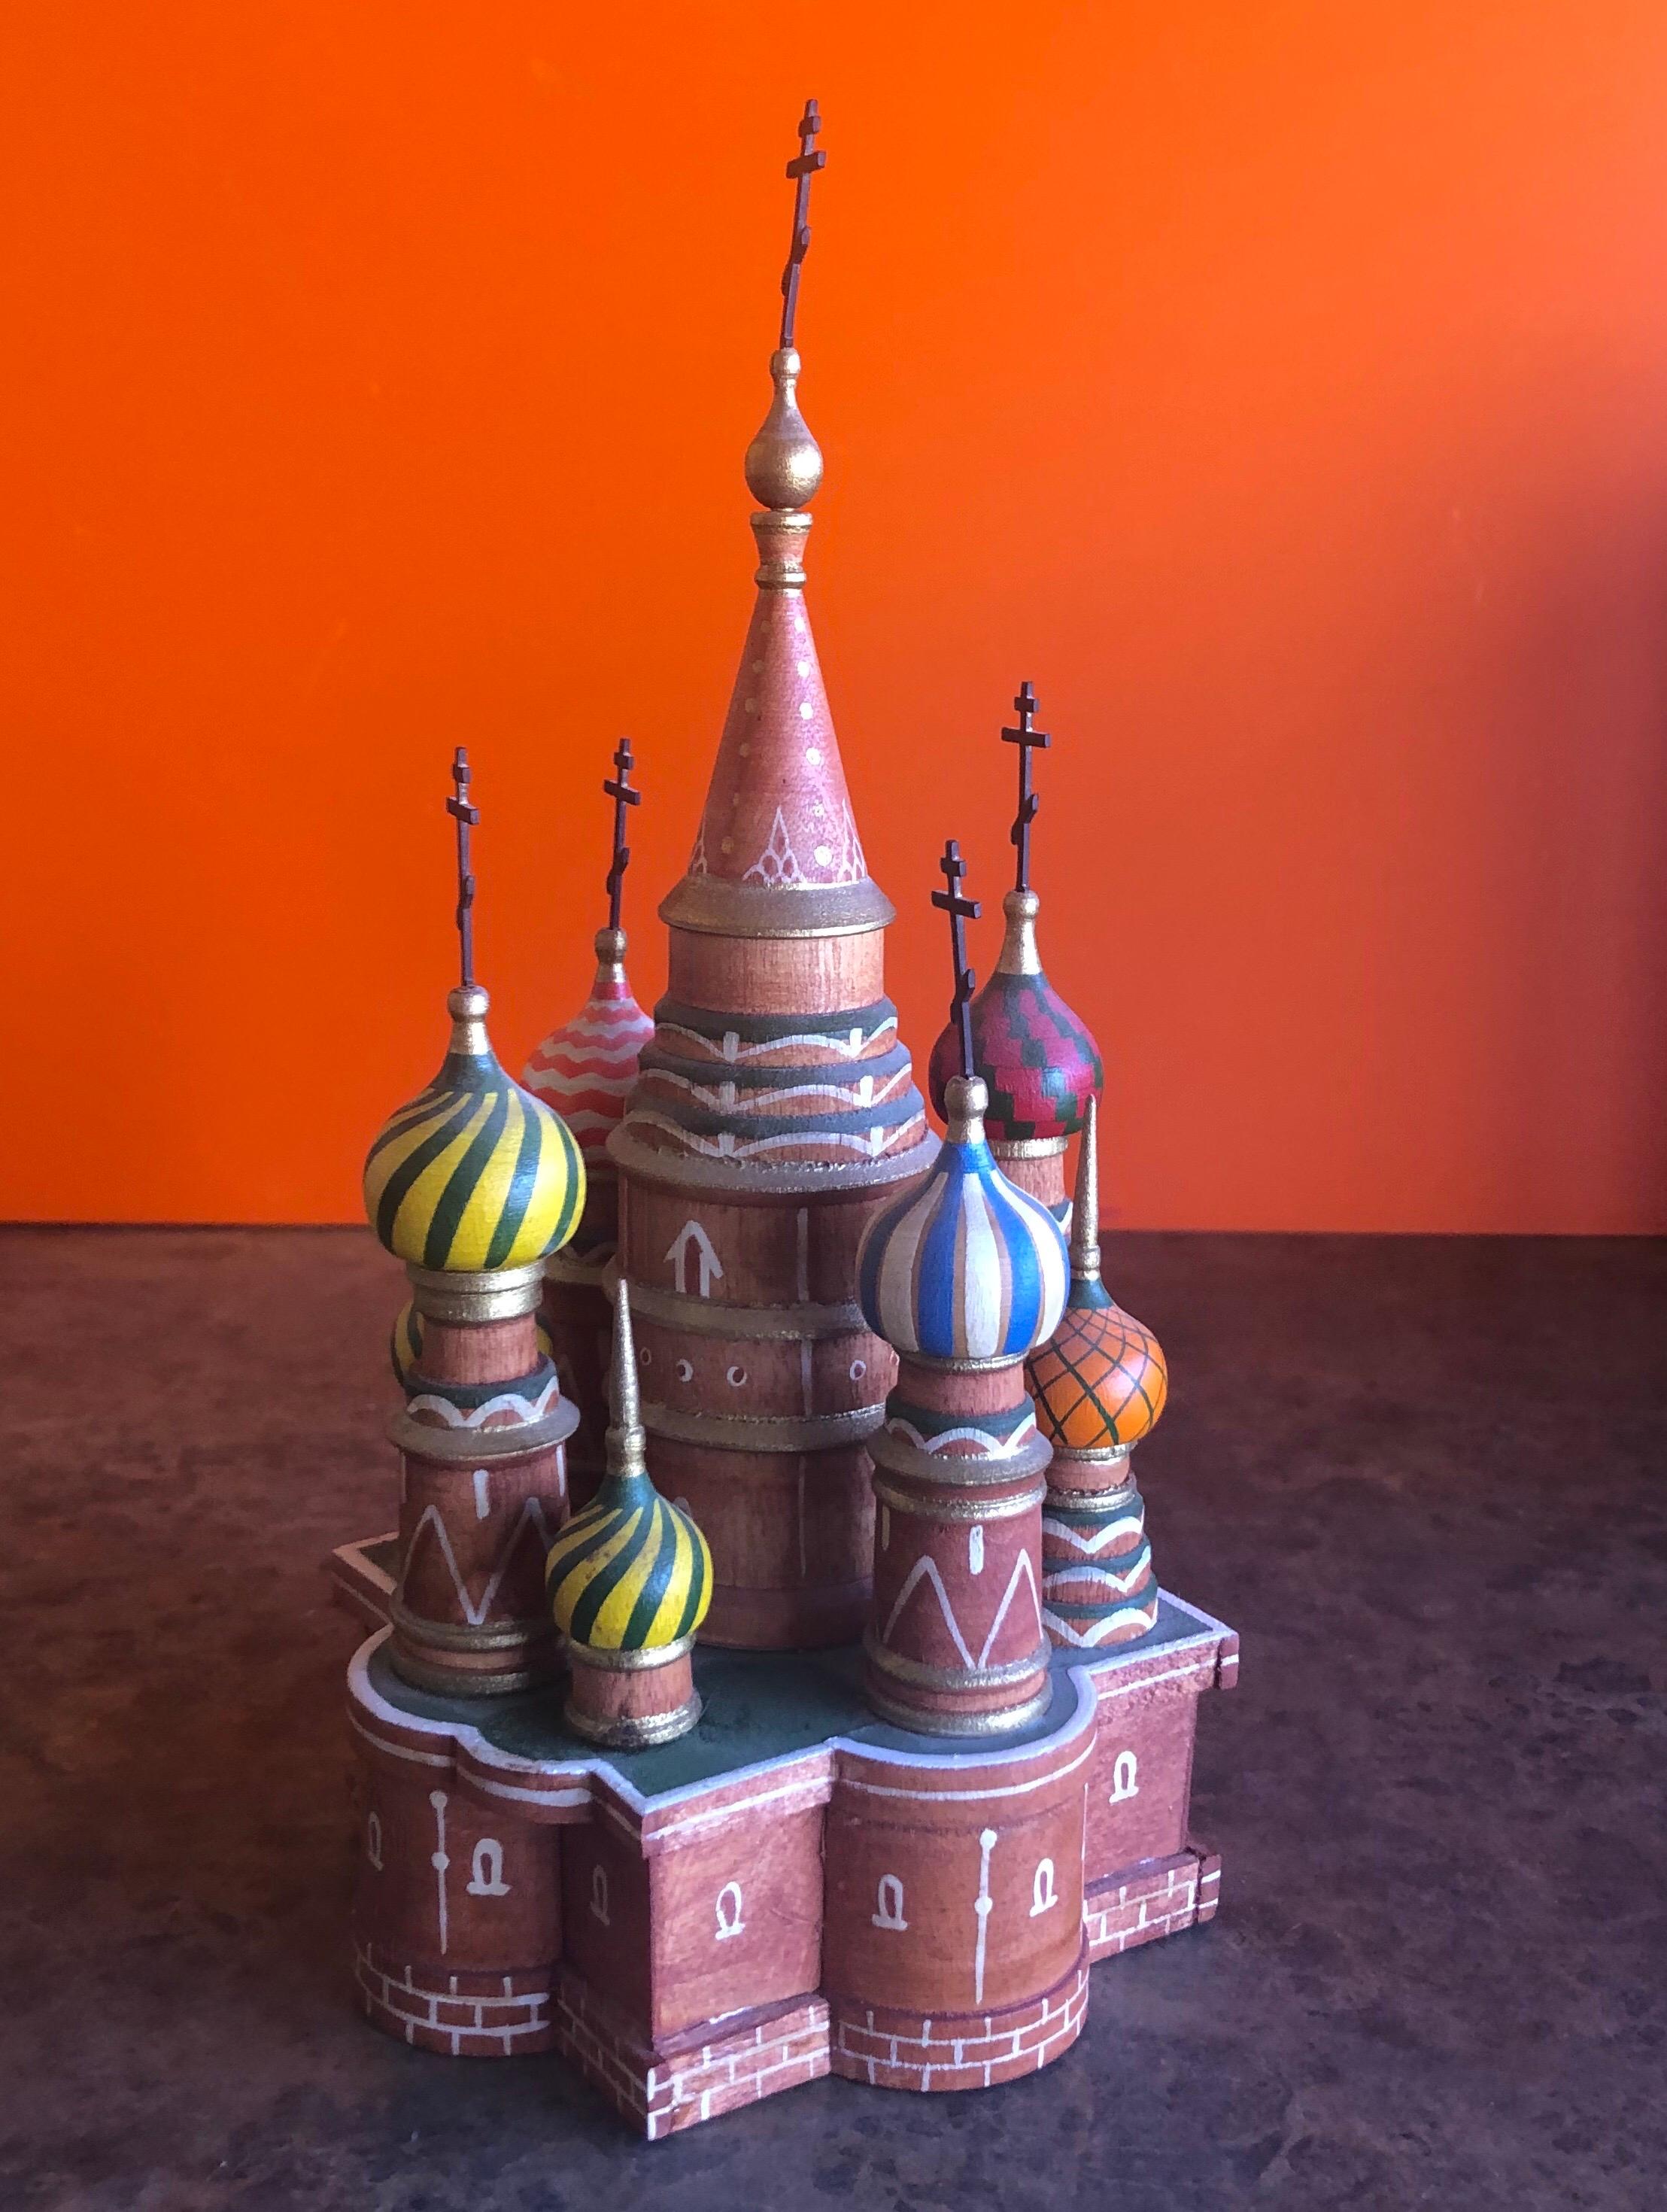 Stunning desktop model of the iconic St Basil's Cathedral in Moscow, Russia. The sculpture is 8.75